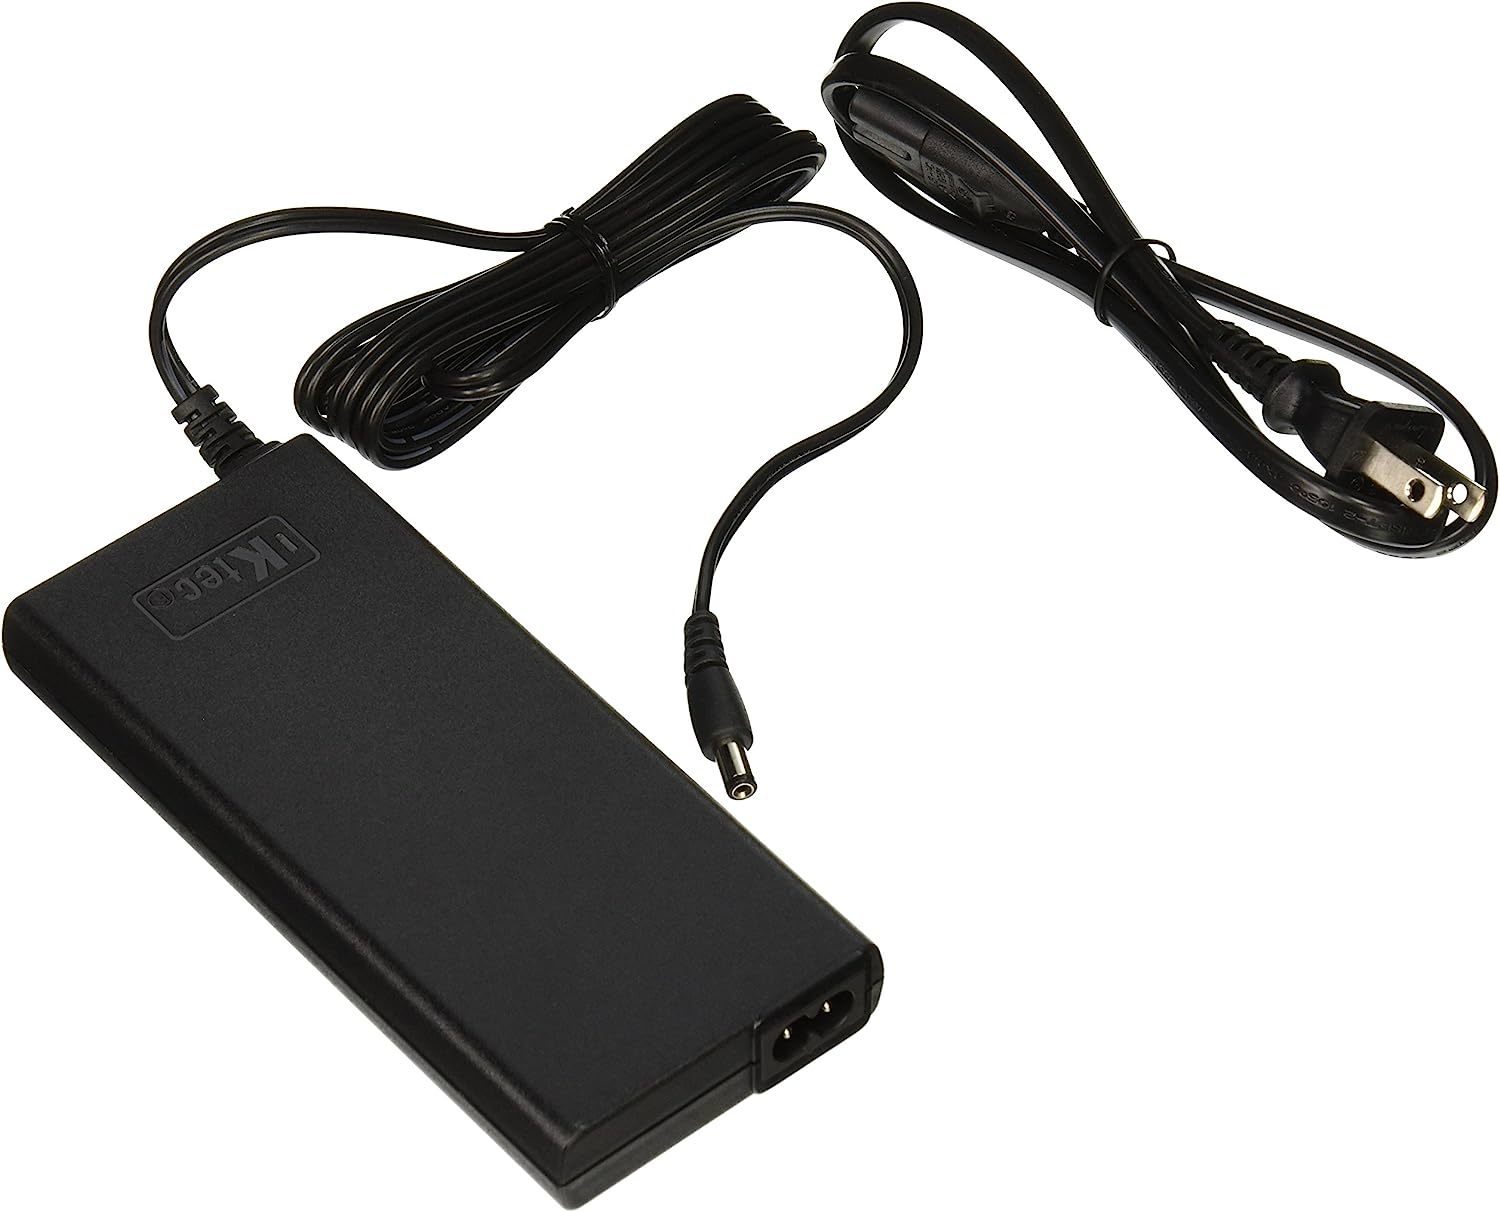 Primary image for Dymo Ac Adapter For Dymo Xtl 500 Label Maker (1888635)